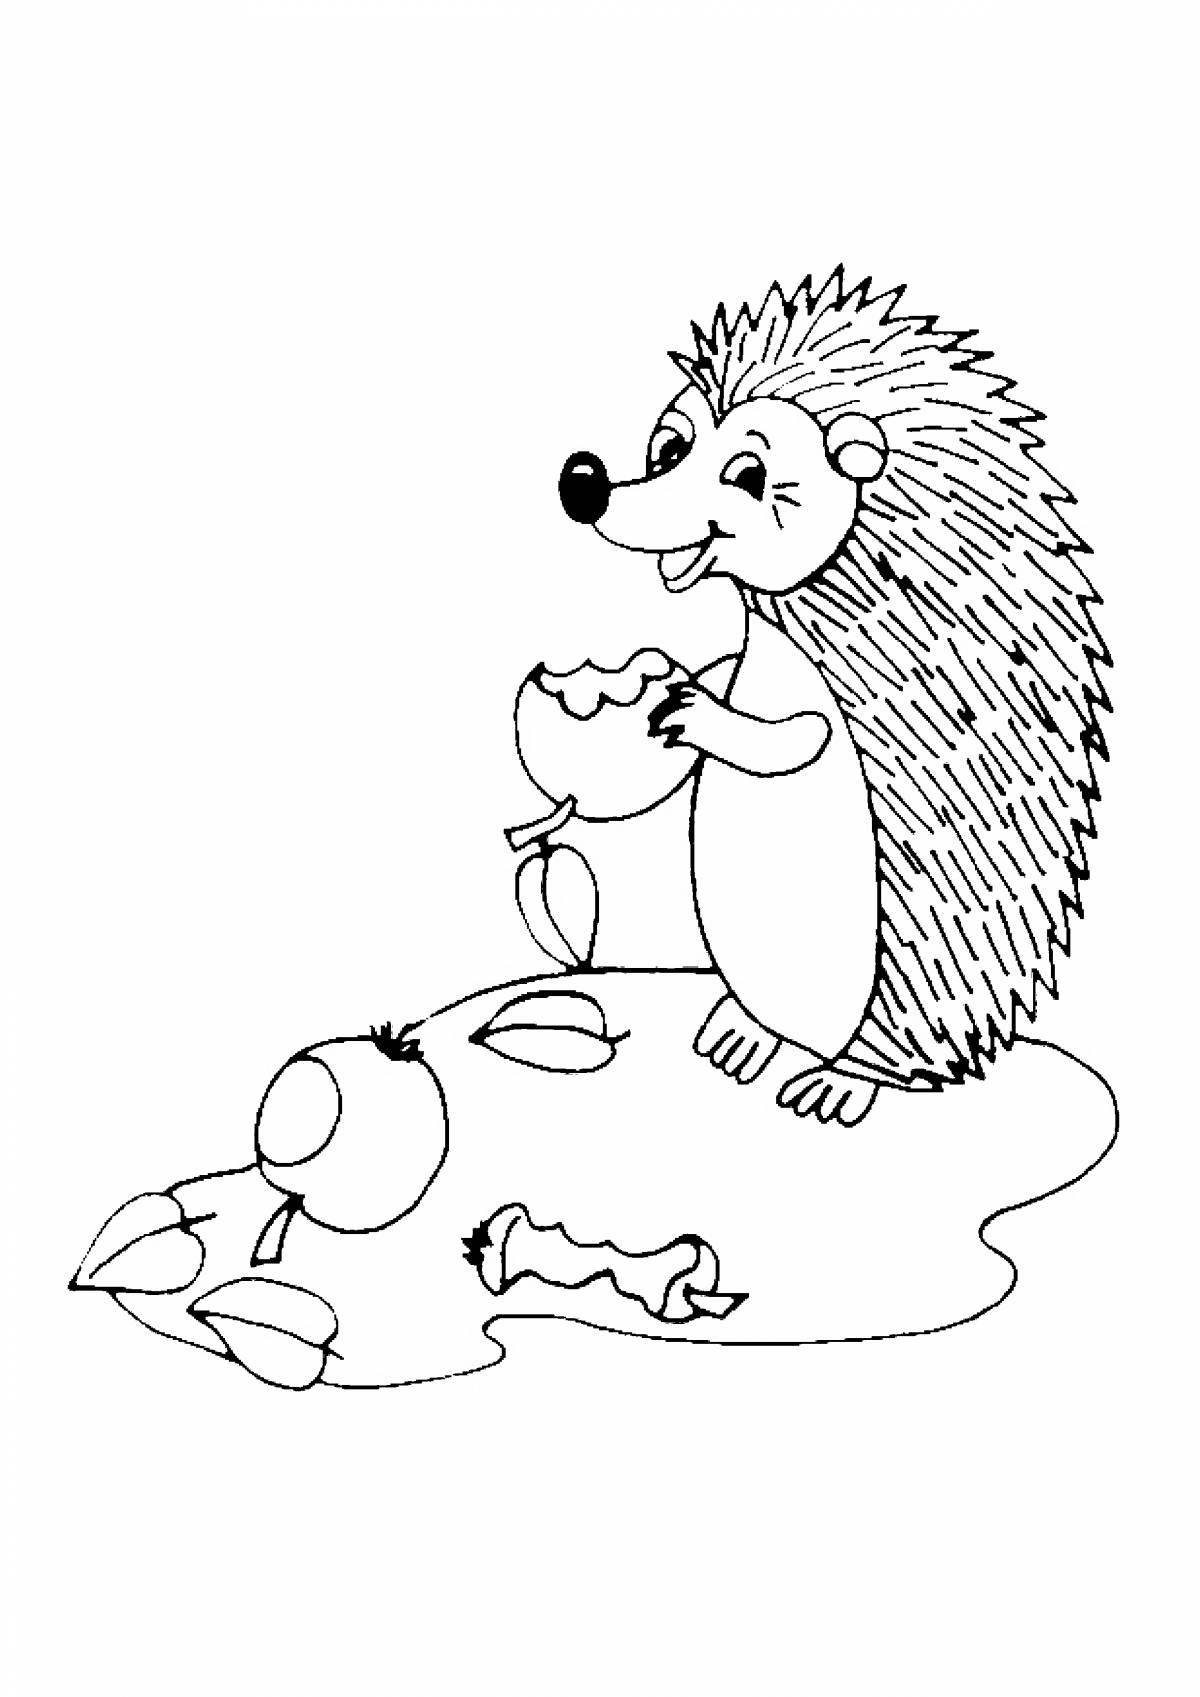 Cute hedgehog coloring pages for kids